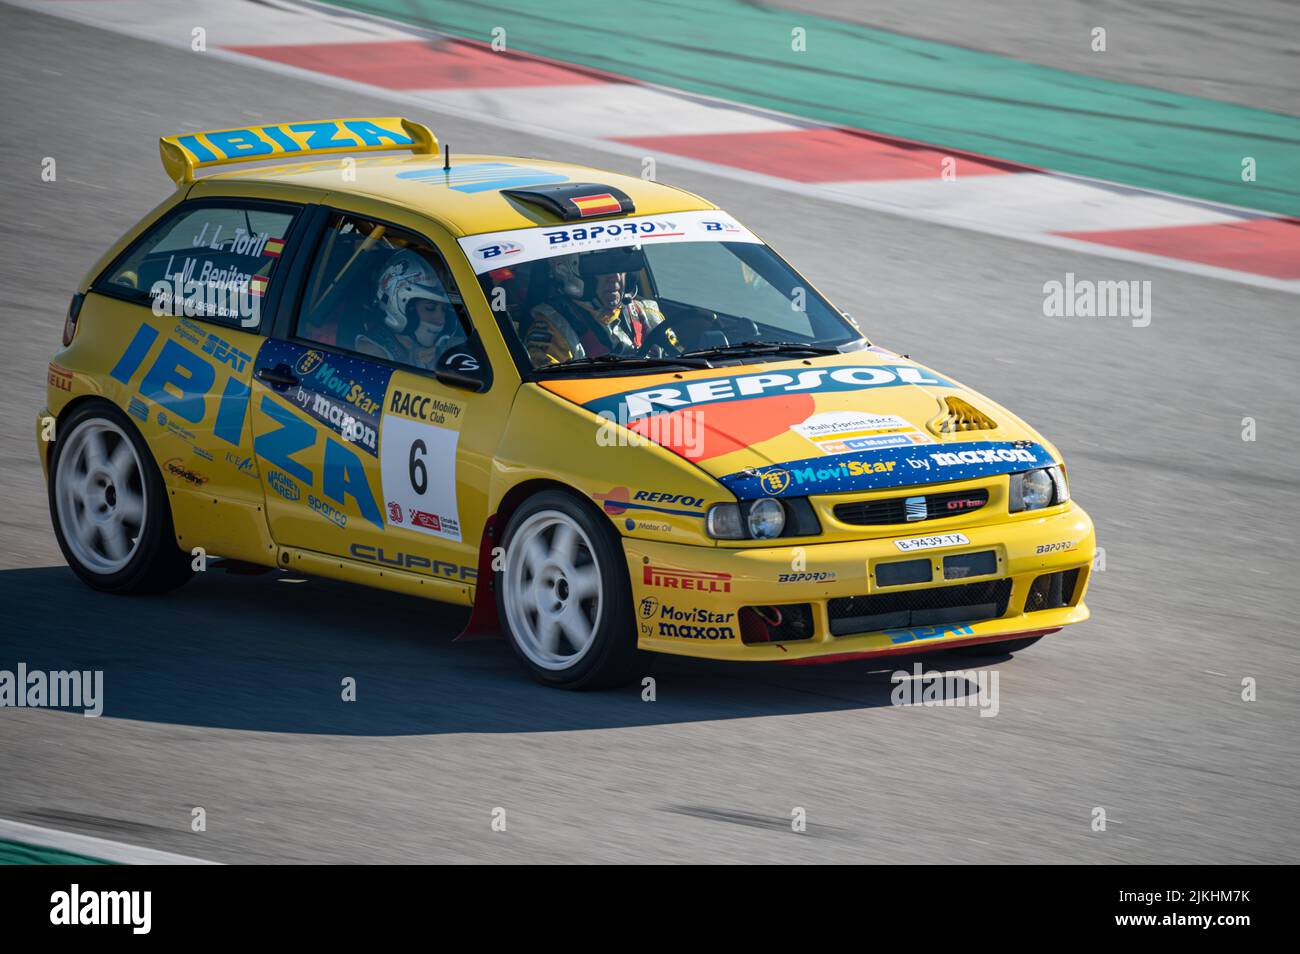 Barcelona, Spain; December 20, 2021: Seat Ibiza Kit Car Racing car in the track of Montmelo Stock Photo